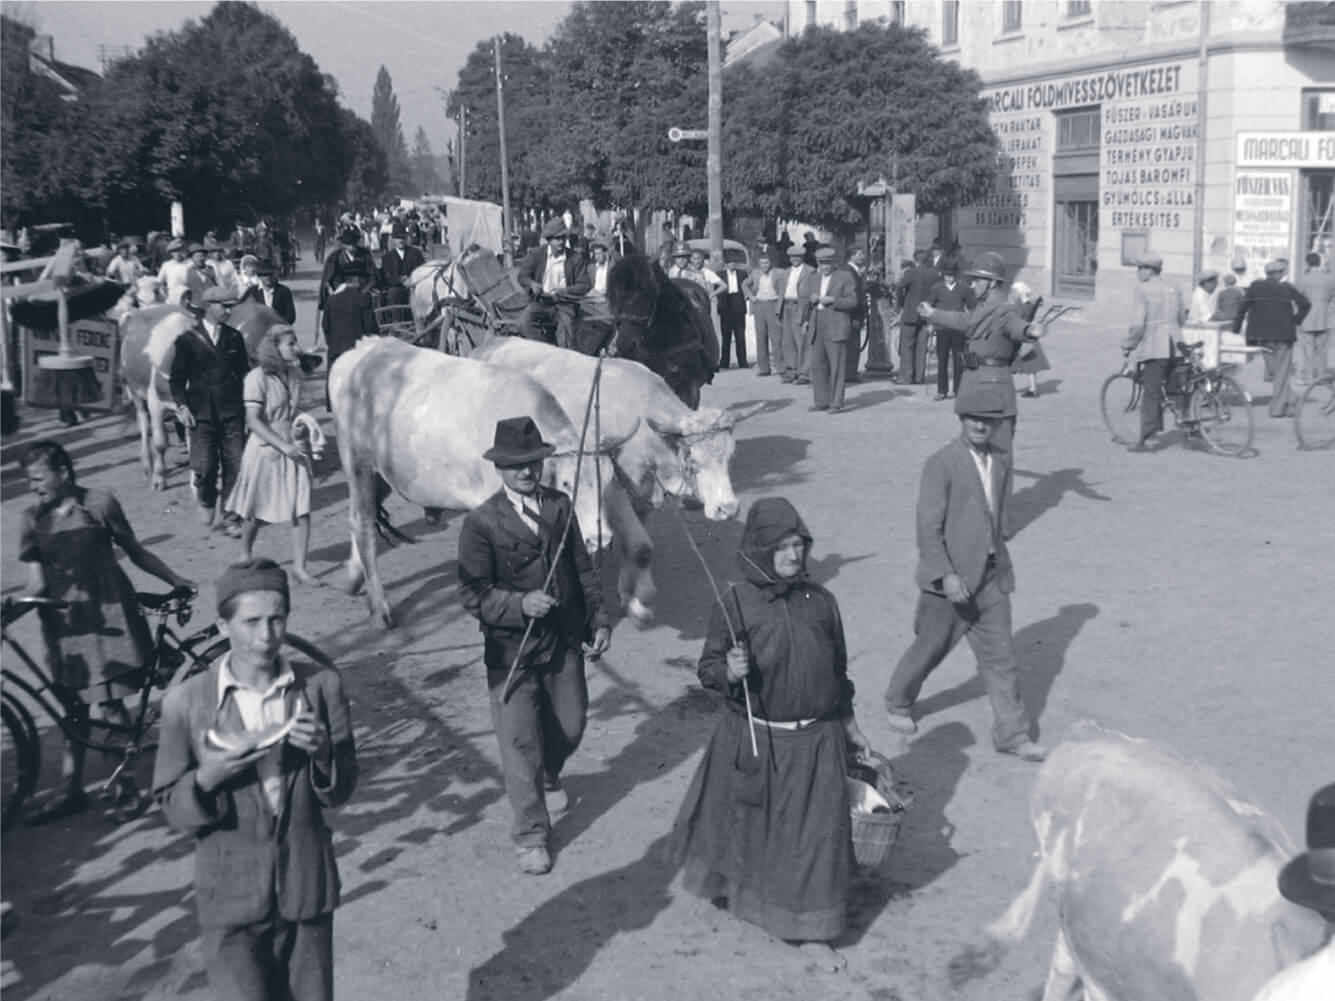 Village fair in Marcali Hungary in 1940s